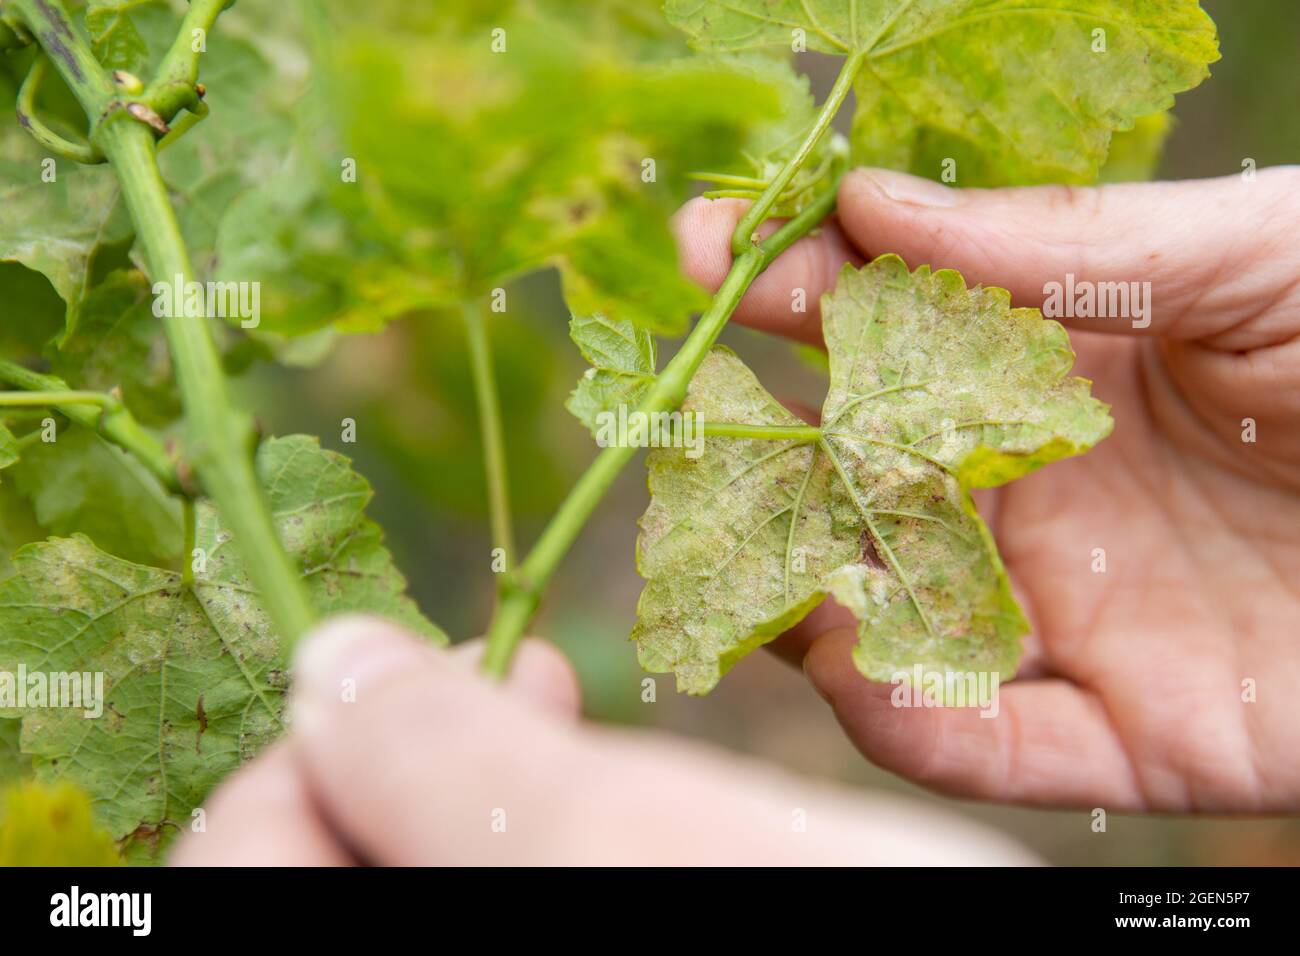 Randersacker, Germany. 19th Aug, 2021. Beate Leopold, managing director of Weinbauring Franken, shows the infestation of fungal spores of the so-called downy mildew (peronospora) on leaves of a vine. The fungal disease is threatening the grapes in some vineyards in Franconia. After the many rains in spring and summer, the fungus is a widespread problem throughout Germany, but also in other European countries. Credit: Daniel Karmann/dpa/Alamy Live News Stock Photo